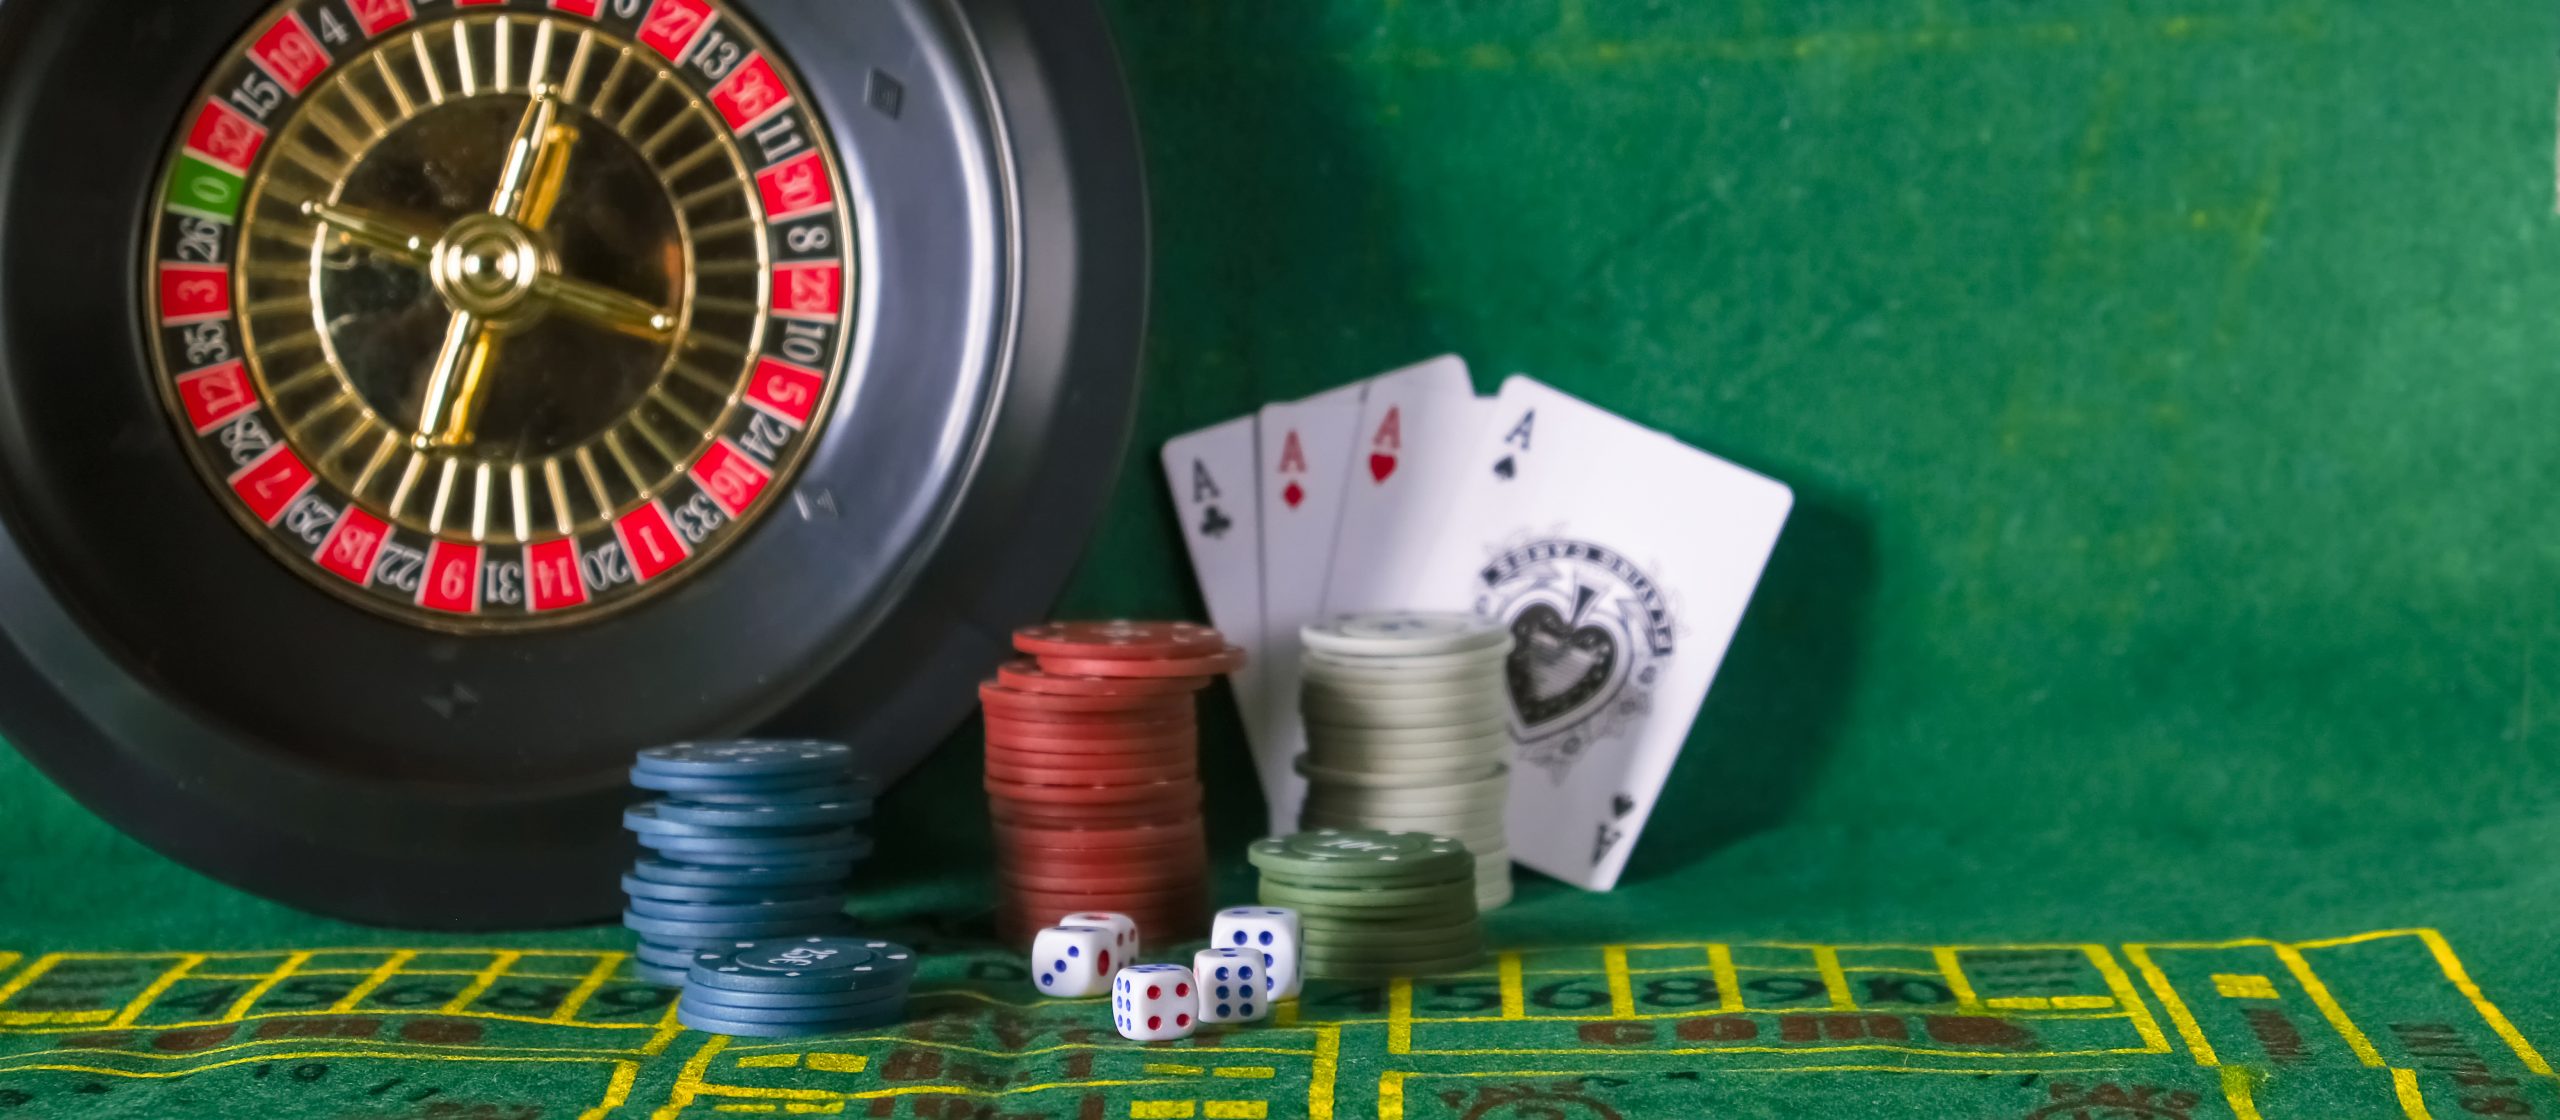 The Top Roulette Betting Strategies